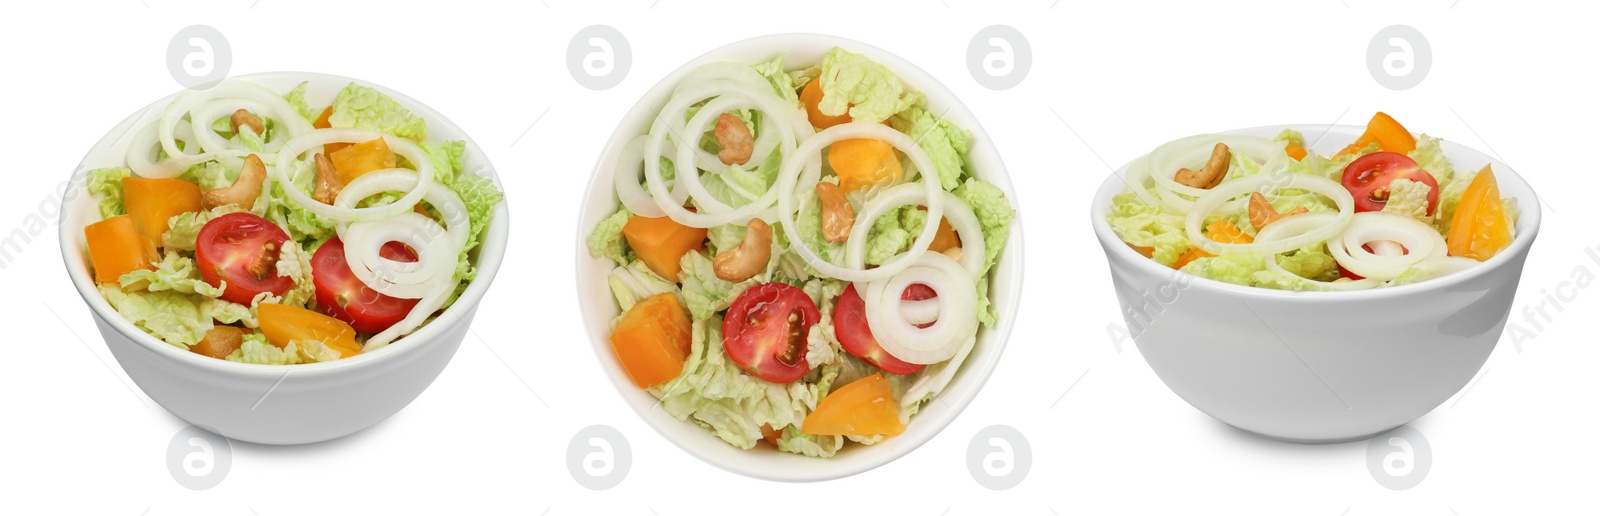 Image of Bowl of tasty salad with Chinese cabbage, tomatoes and onion on white background, different sides. Collage design